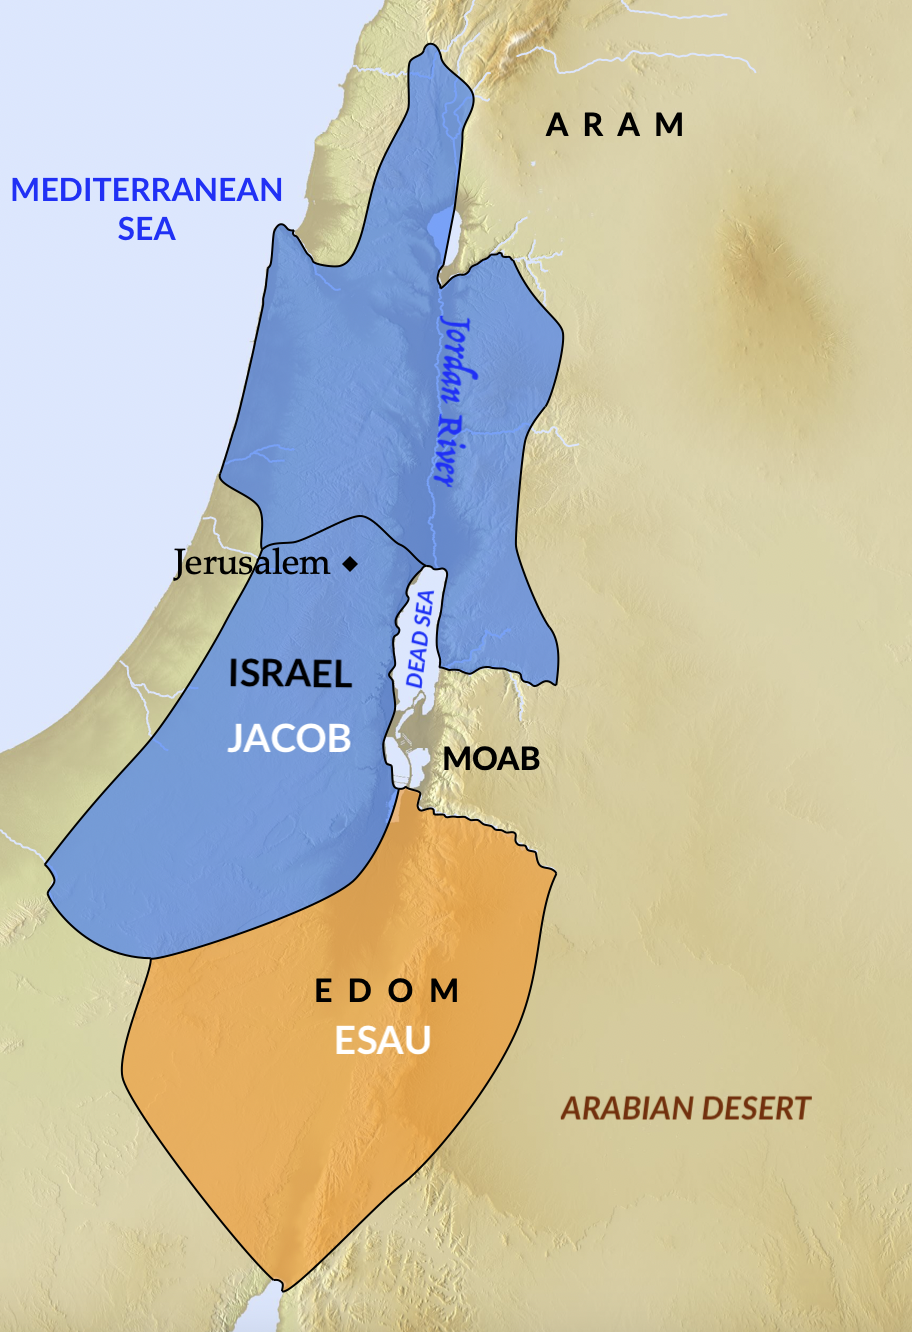 The two countries of Jacob (Israel) and Esau (Edom), like their human counterparts, were oftentimes at odds with each other.